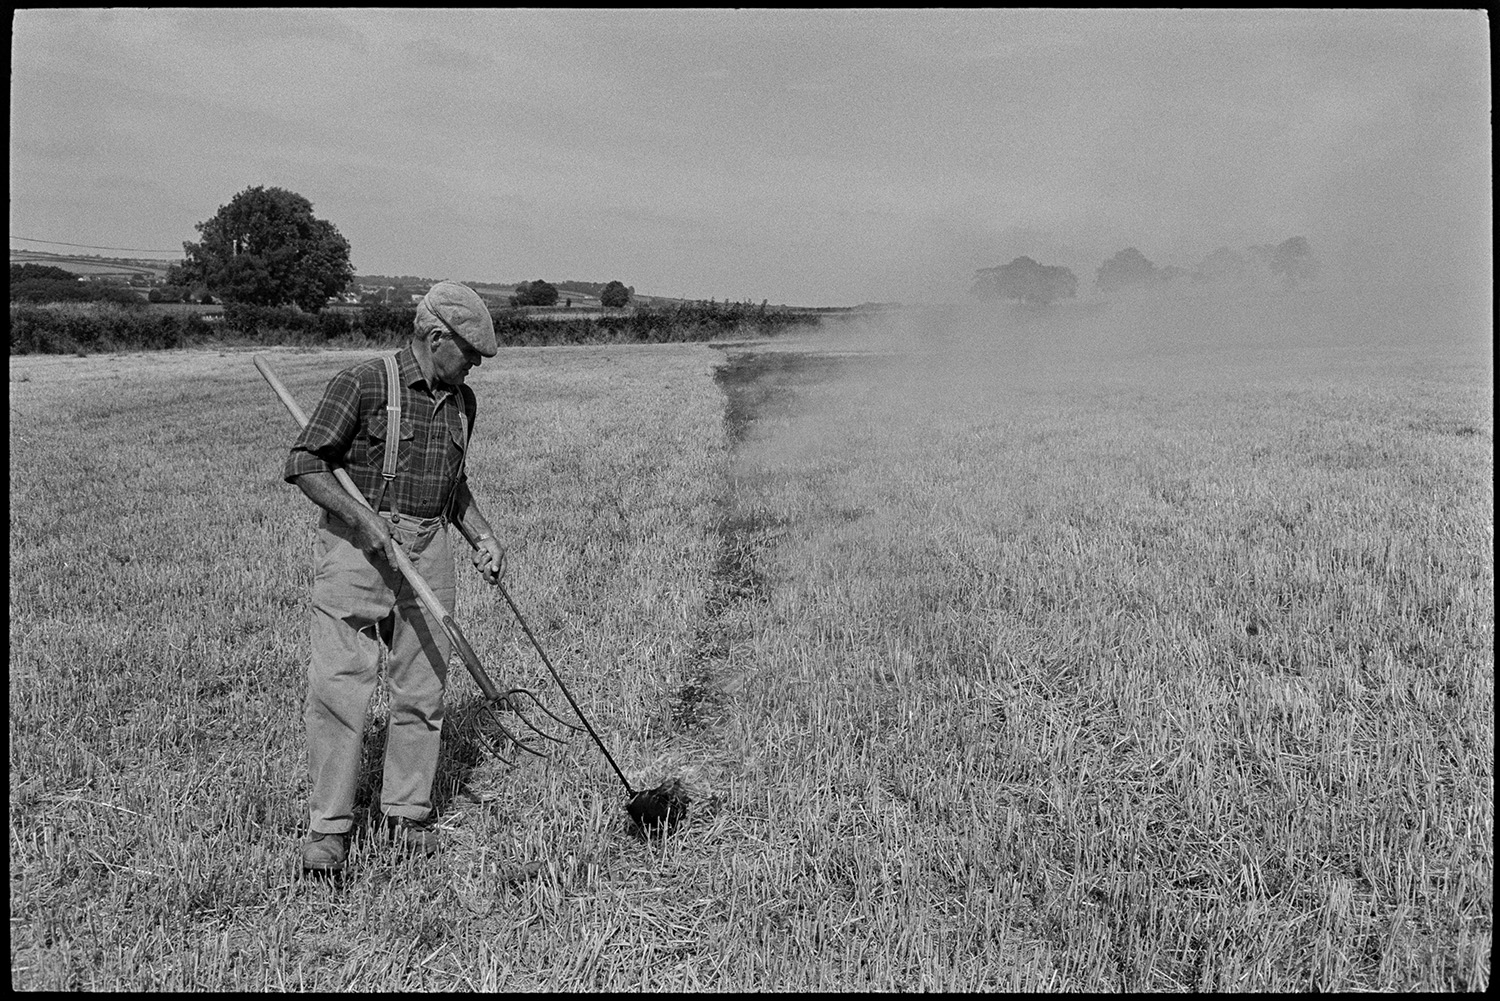 Farmer burning stubble. 
[Alf Pugsley burning crop stubble in a field at Lower Langham, Dolton. He is using a flaming torch and a fork. Smoke is rising from the area he has already burnt.]